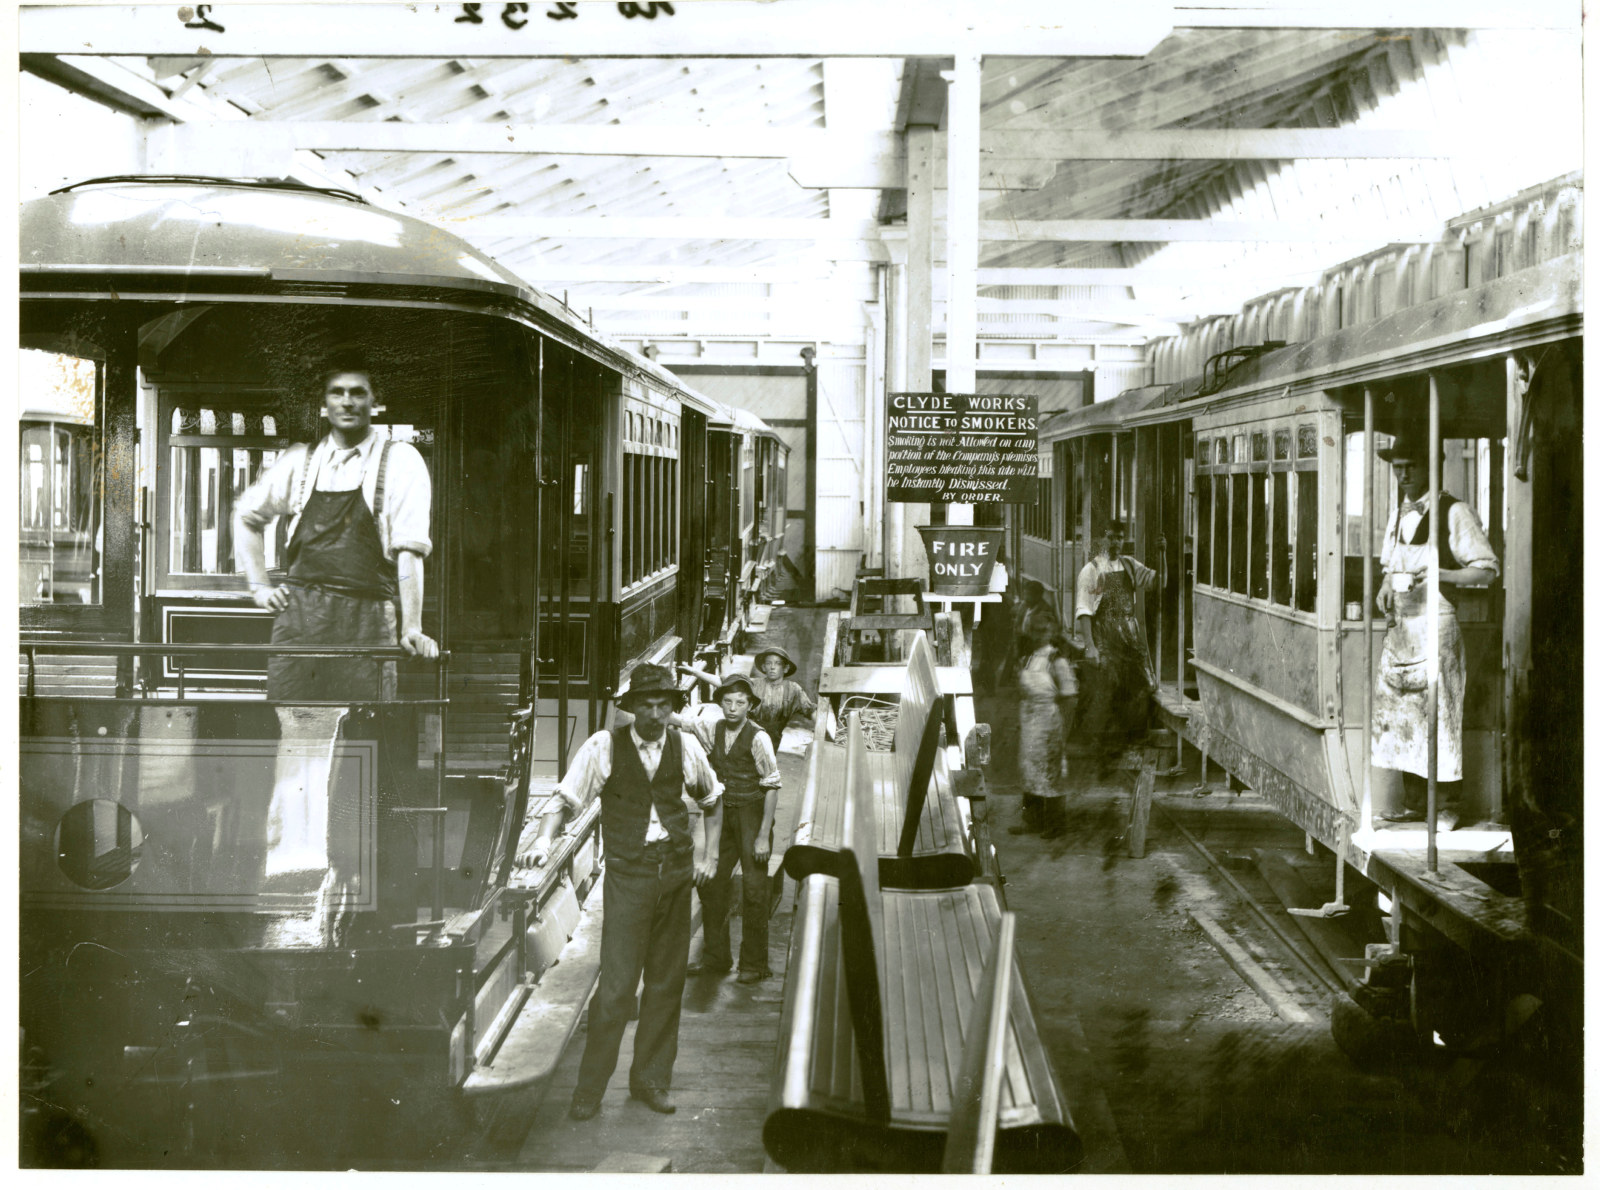 Trams being built in a workshop. Some of the numerous workers gather around looking at the camera.